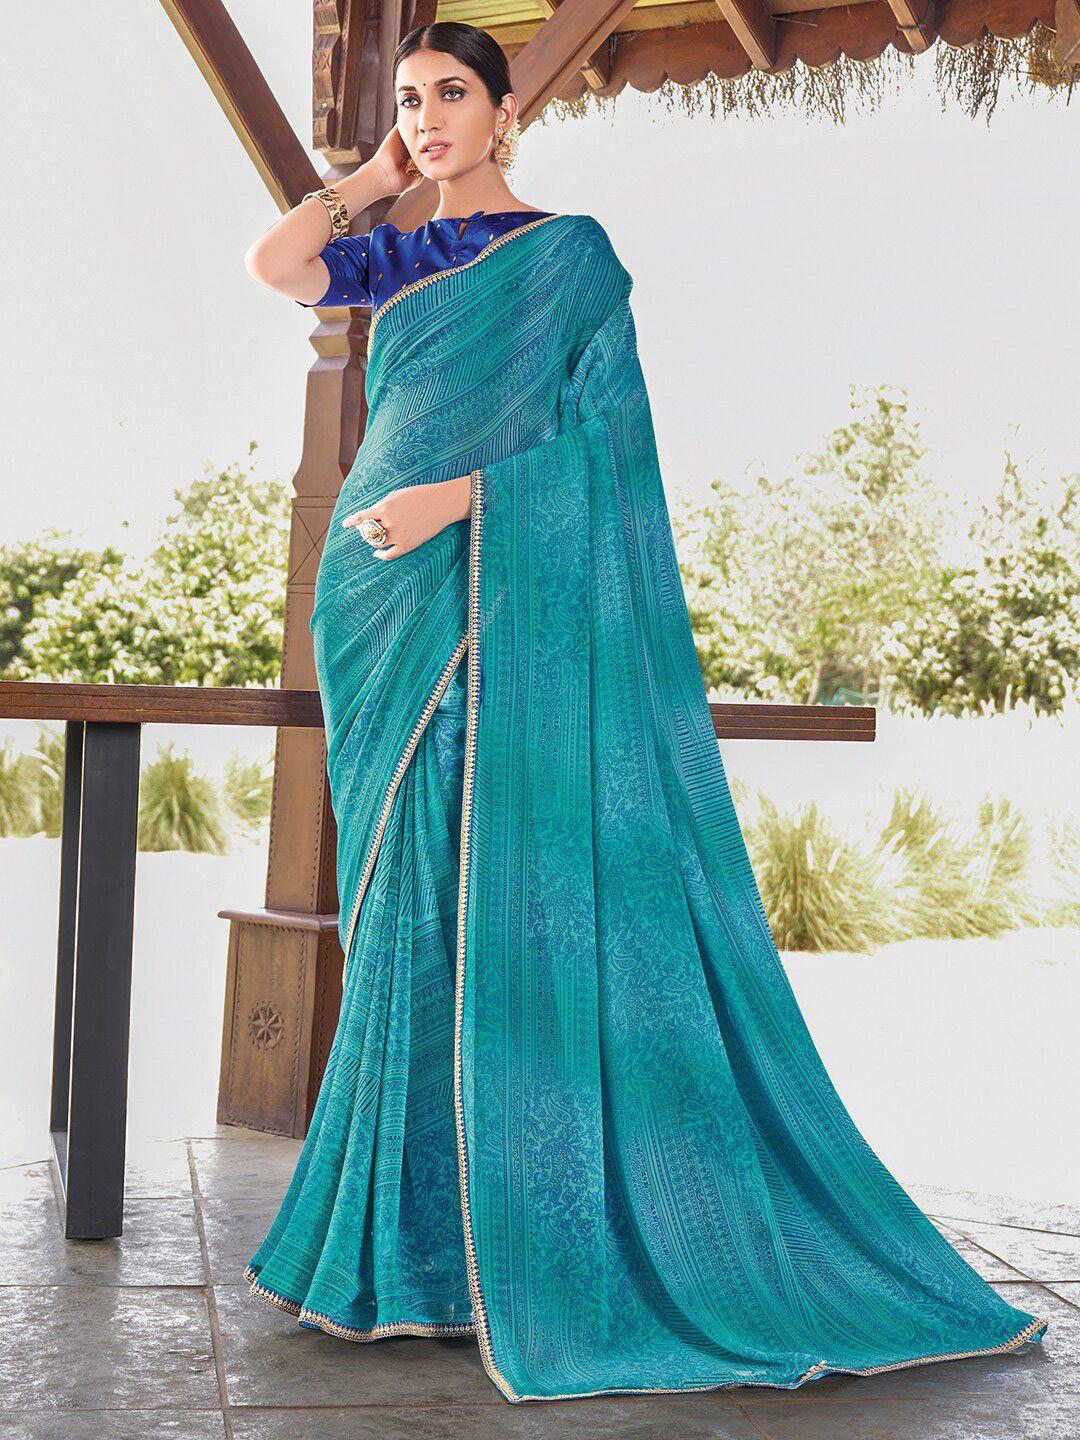 saree-mall-teal-&-gold-toned-ethnic-motifs-printed-pure-georgette-sarees